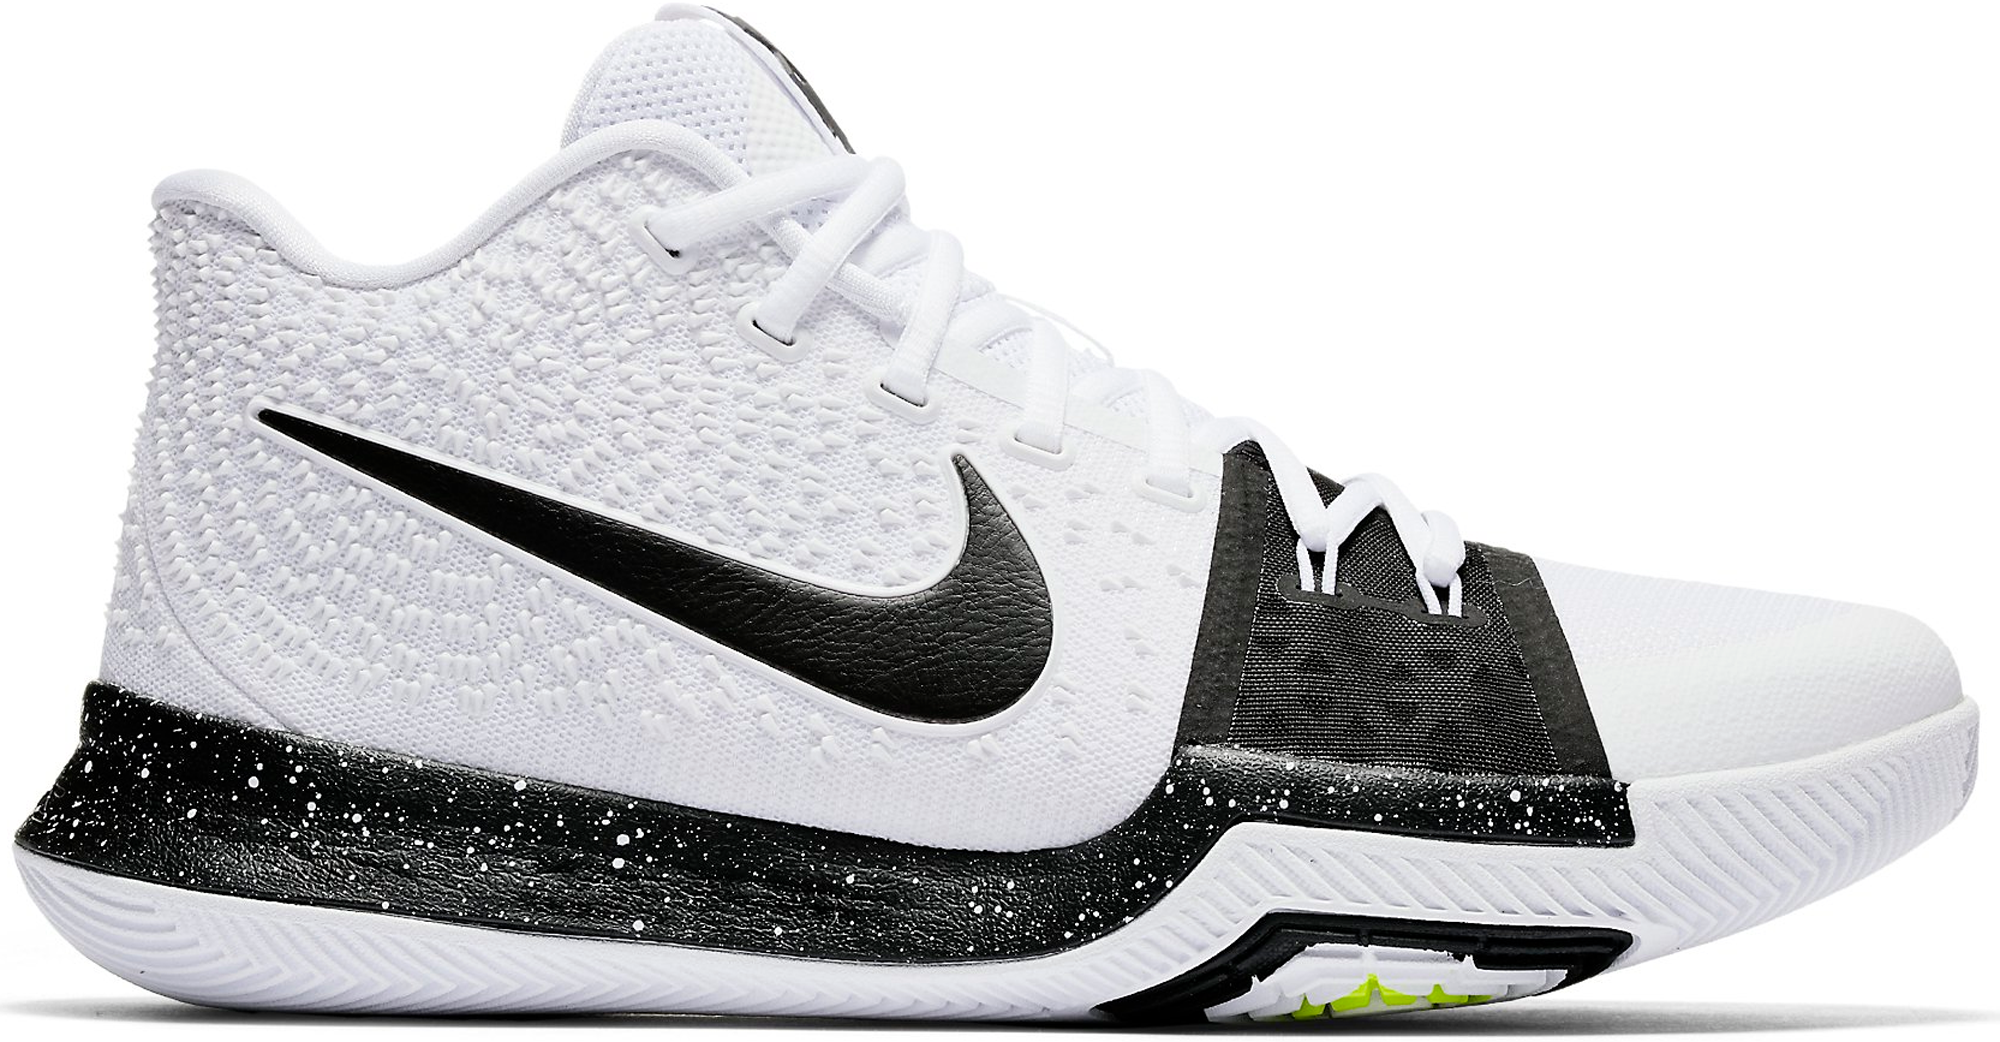 kyrie 3 white and black